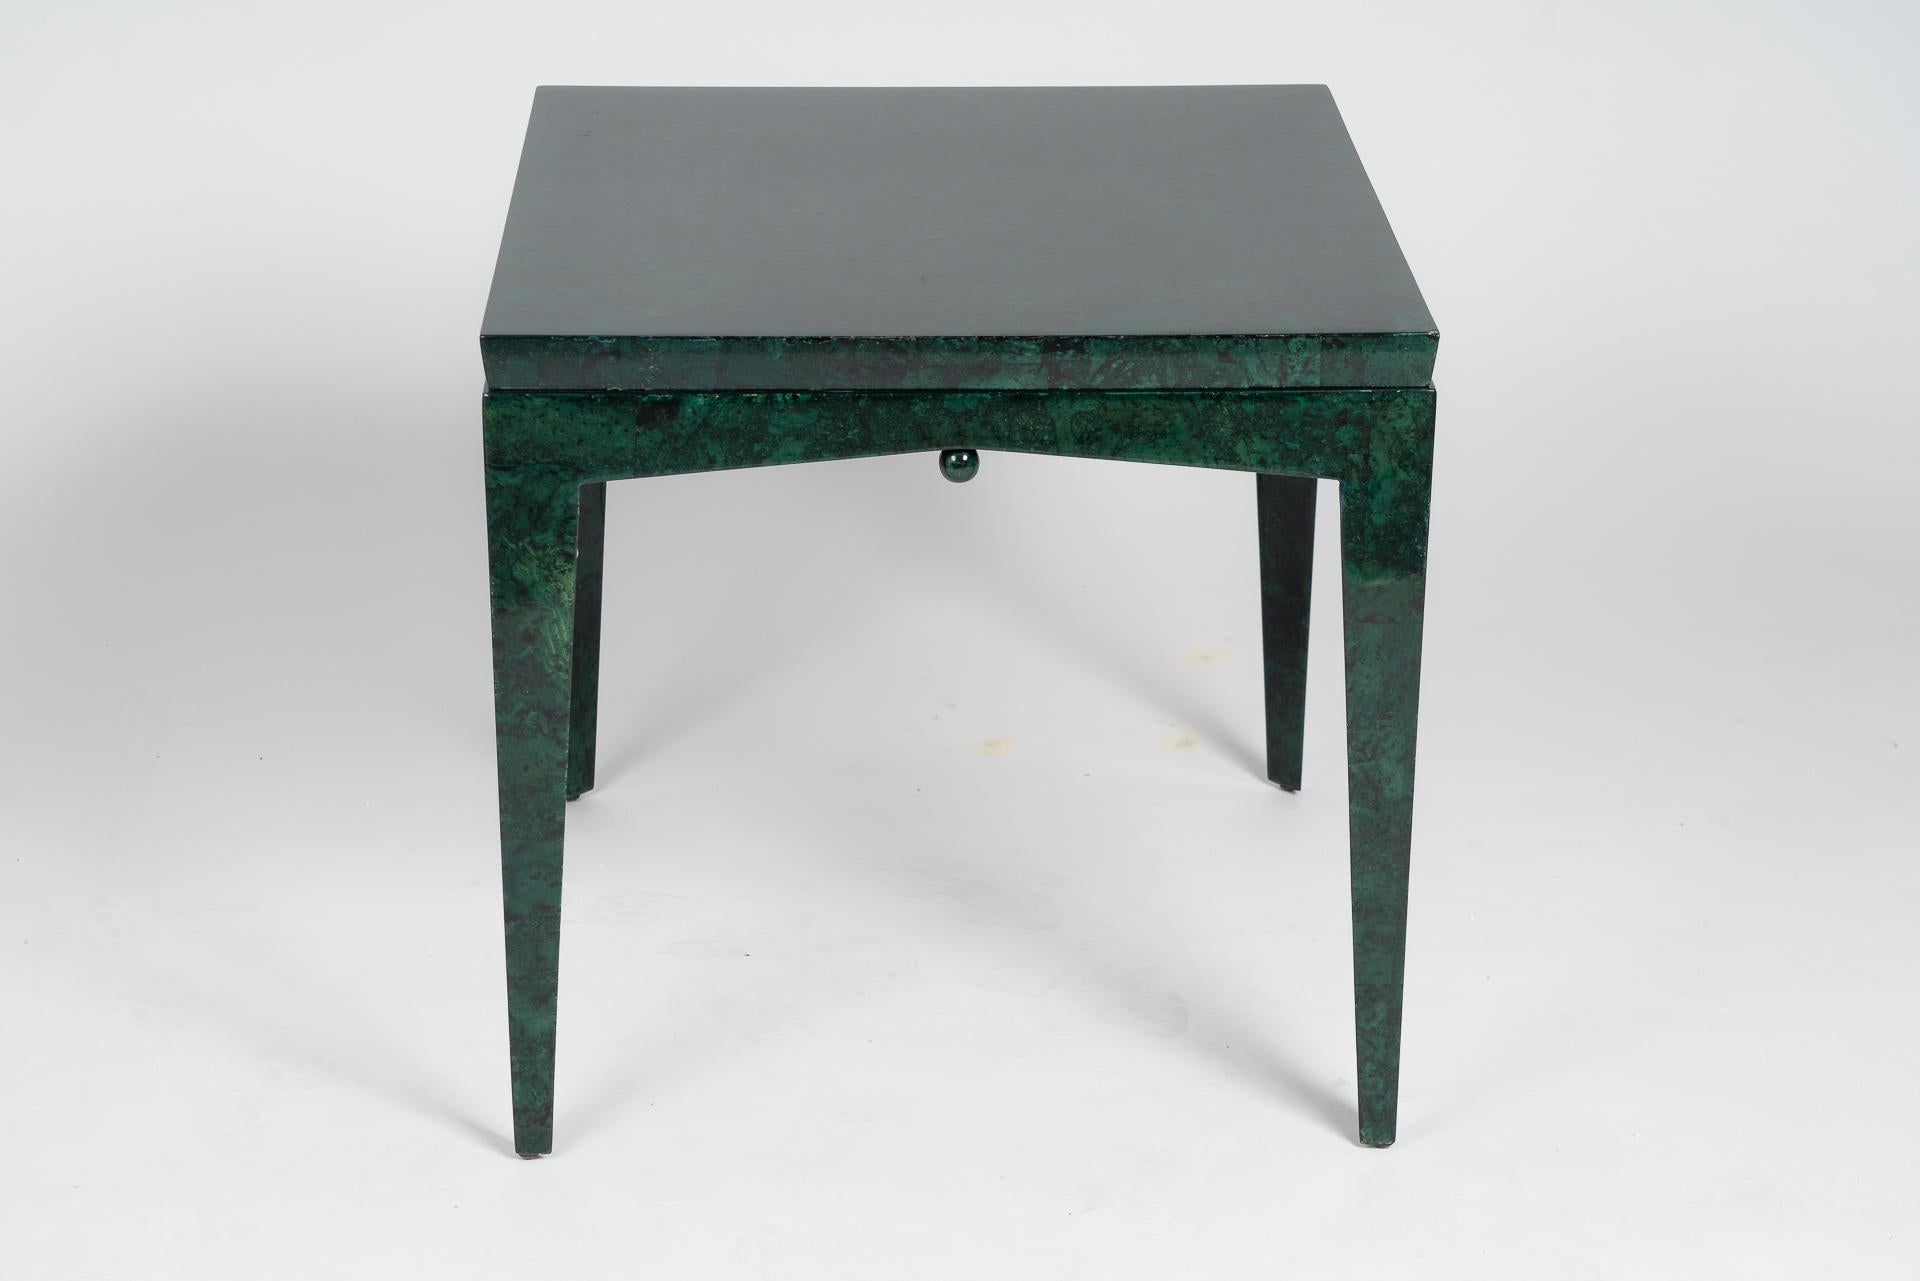 This unique side table it’s made in wood and covered with a bark surface in green. The design was made of the Founder of the Pilati Company, Count Pilati in 1968 and has a metal signee. Especially the attention to the details of the table make it a